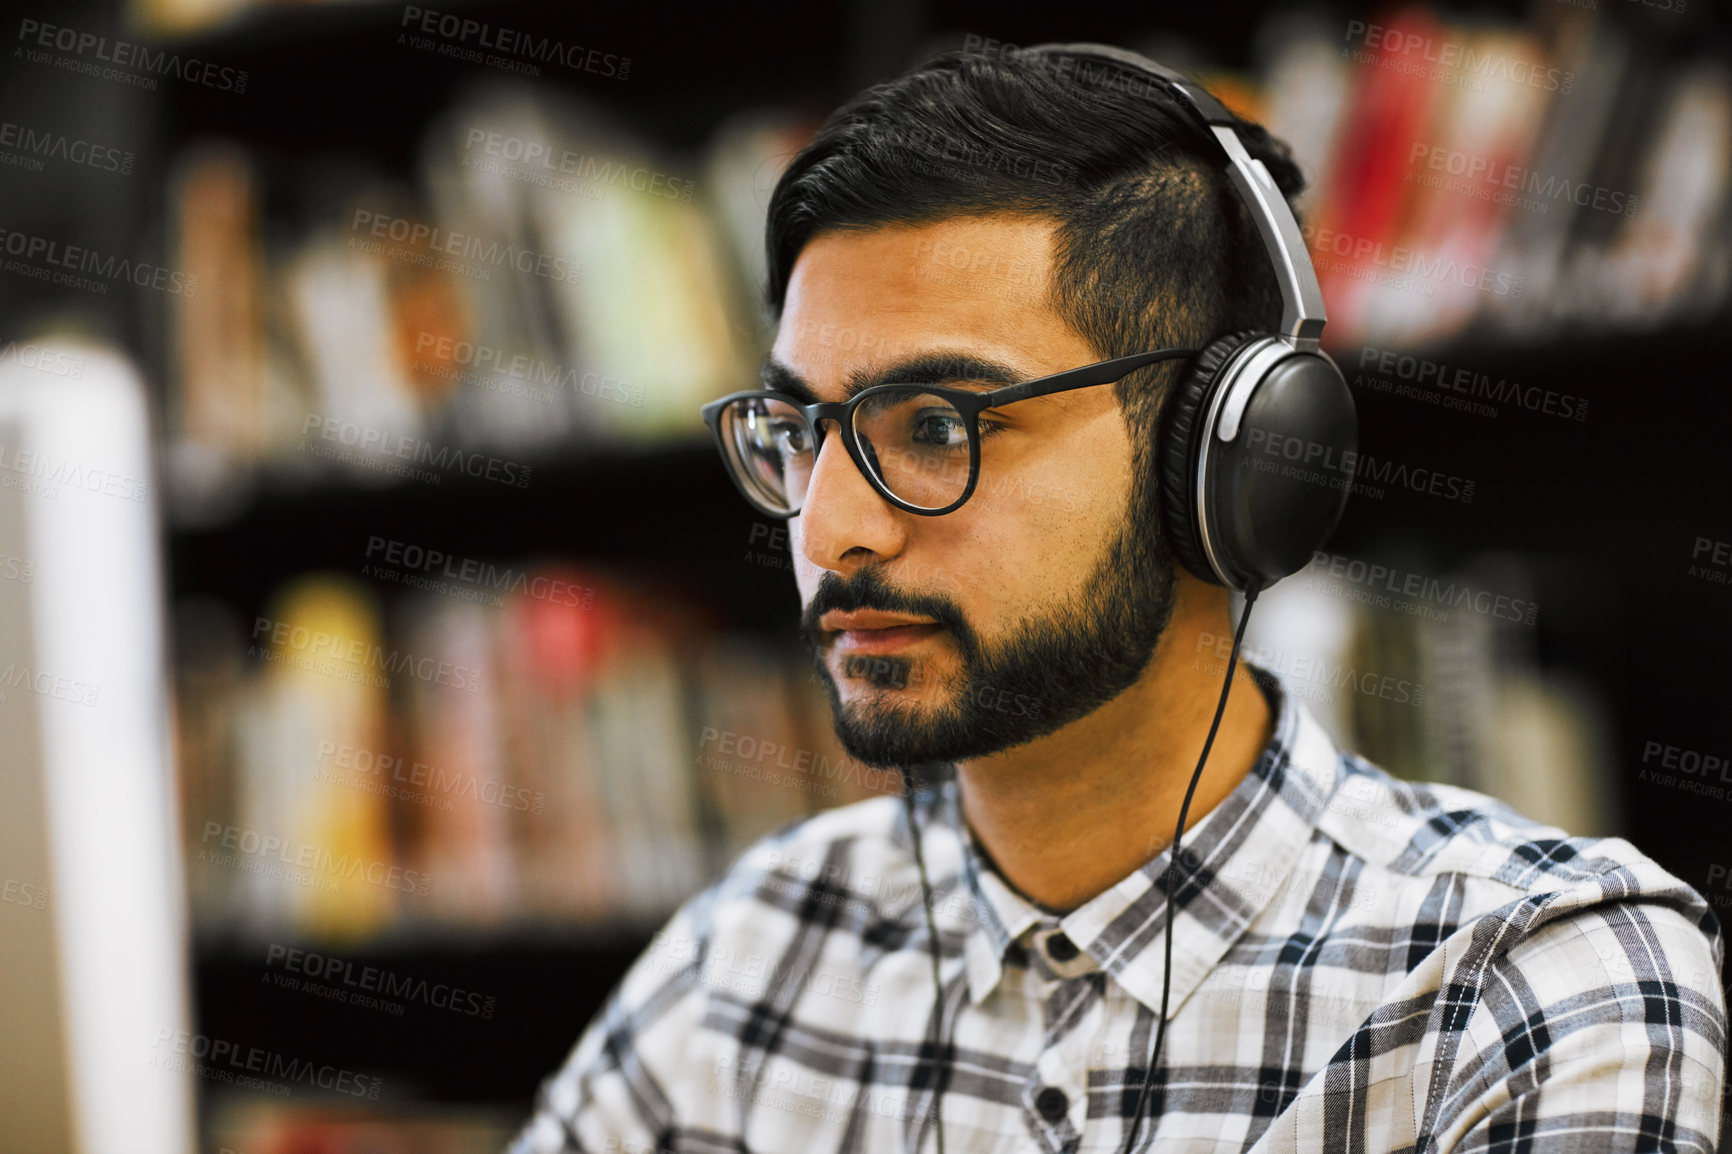 Buy stock photo Closeup shot of a focused young man sitting and working on a computer in a library while listening to music